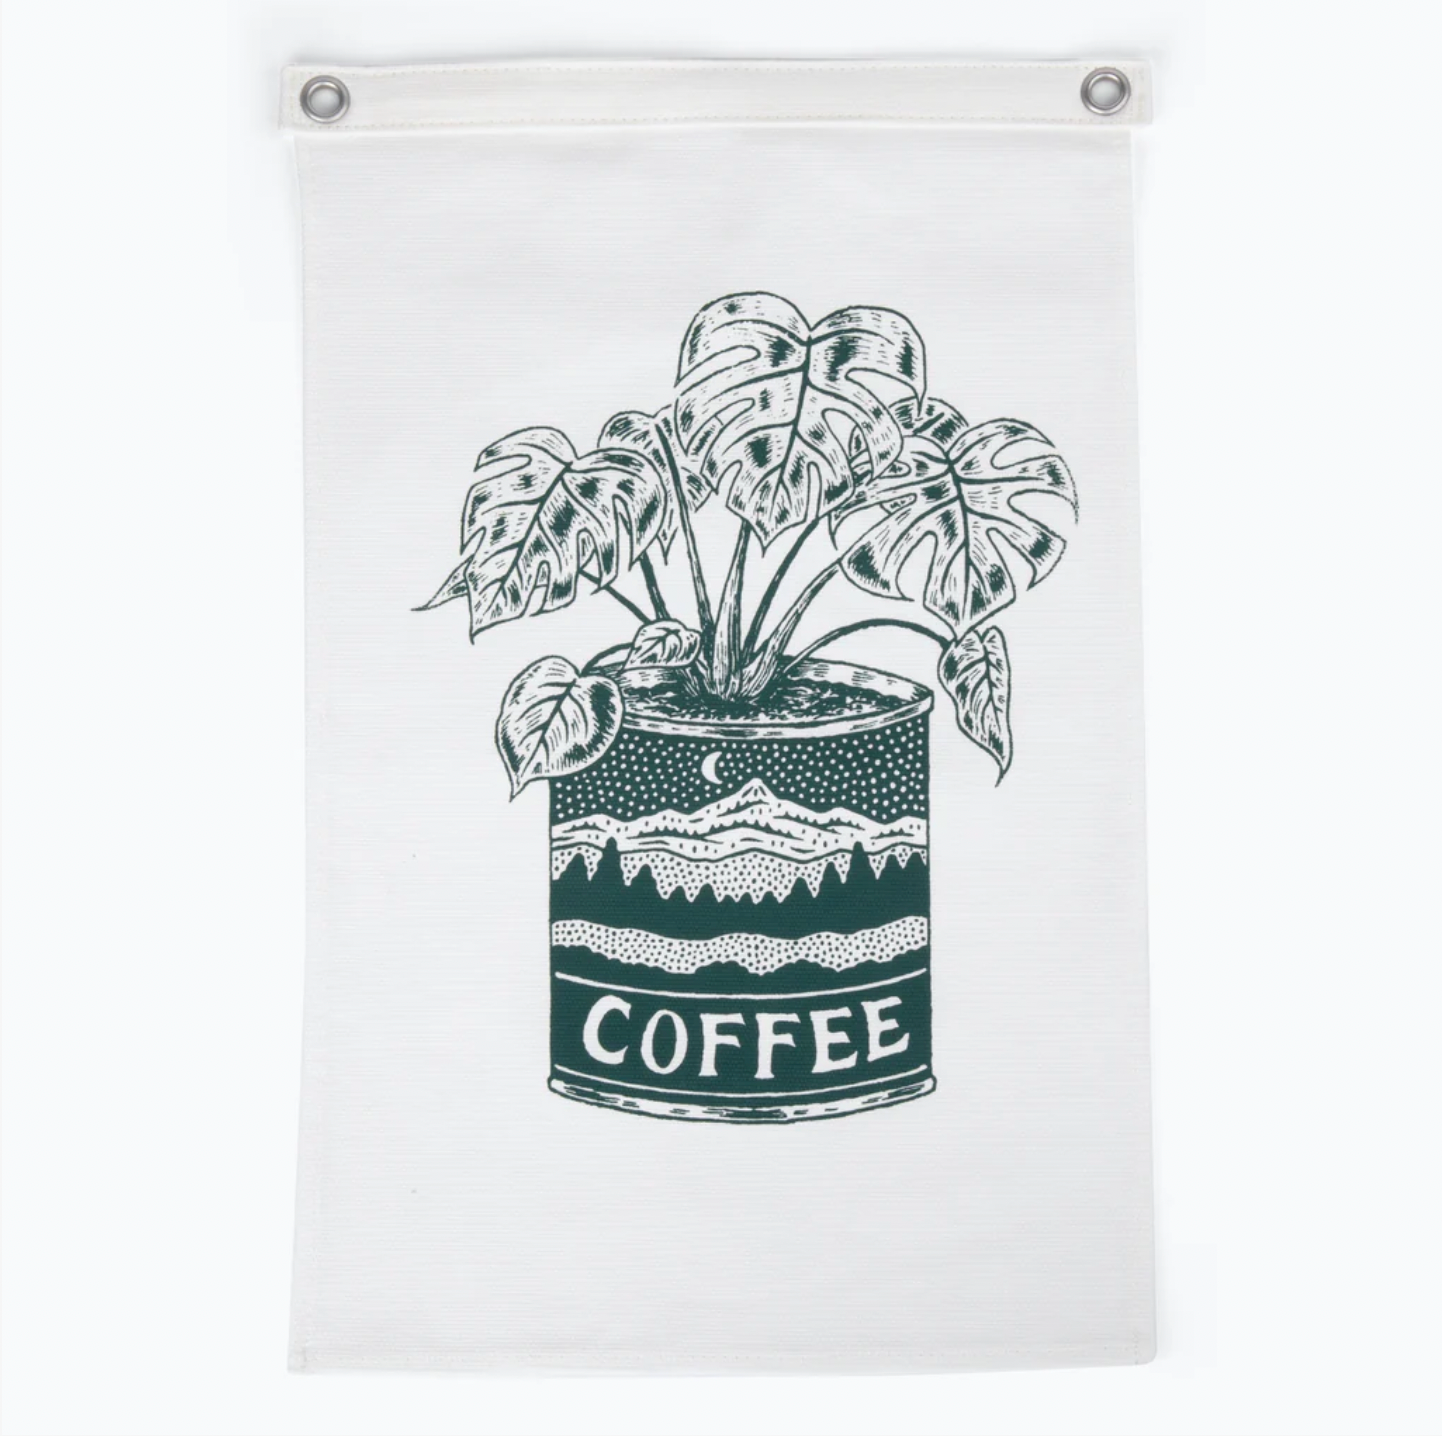 Monstera coffee can wall flag